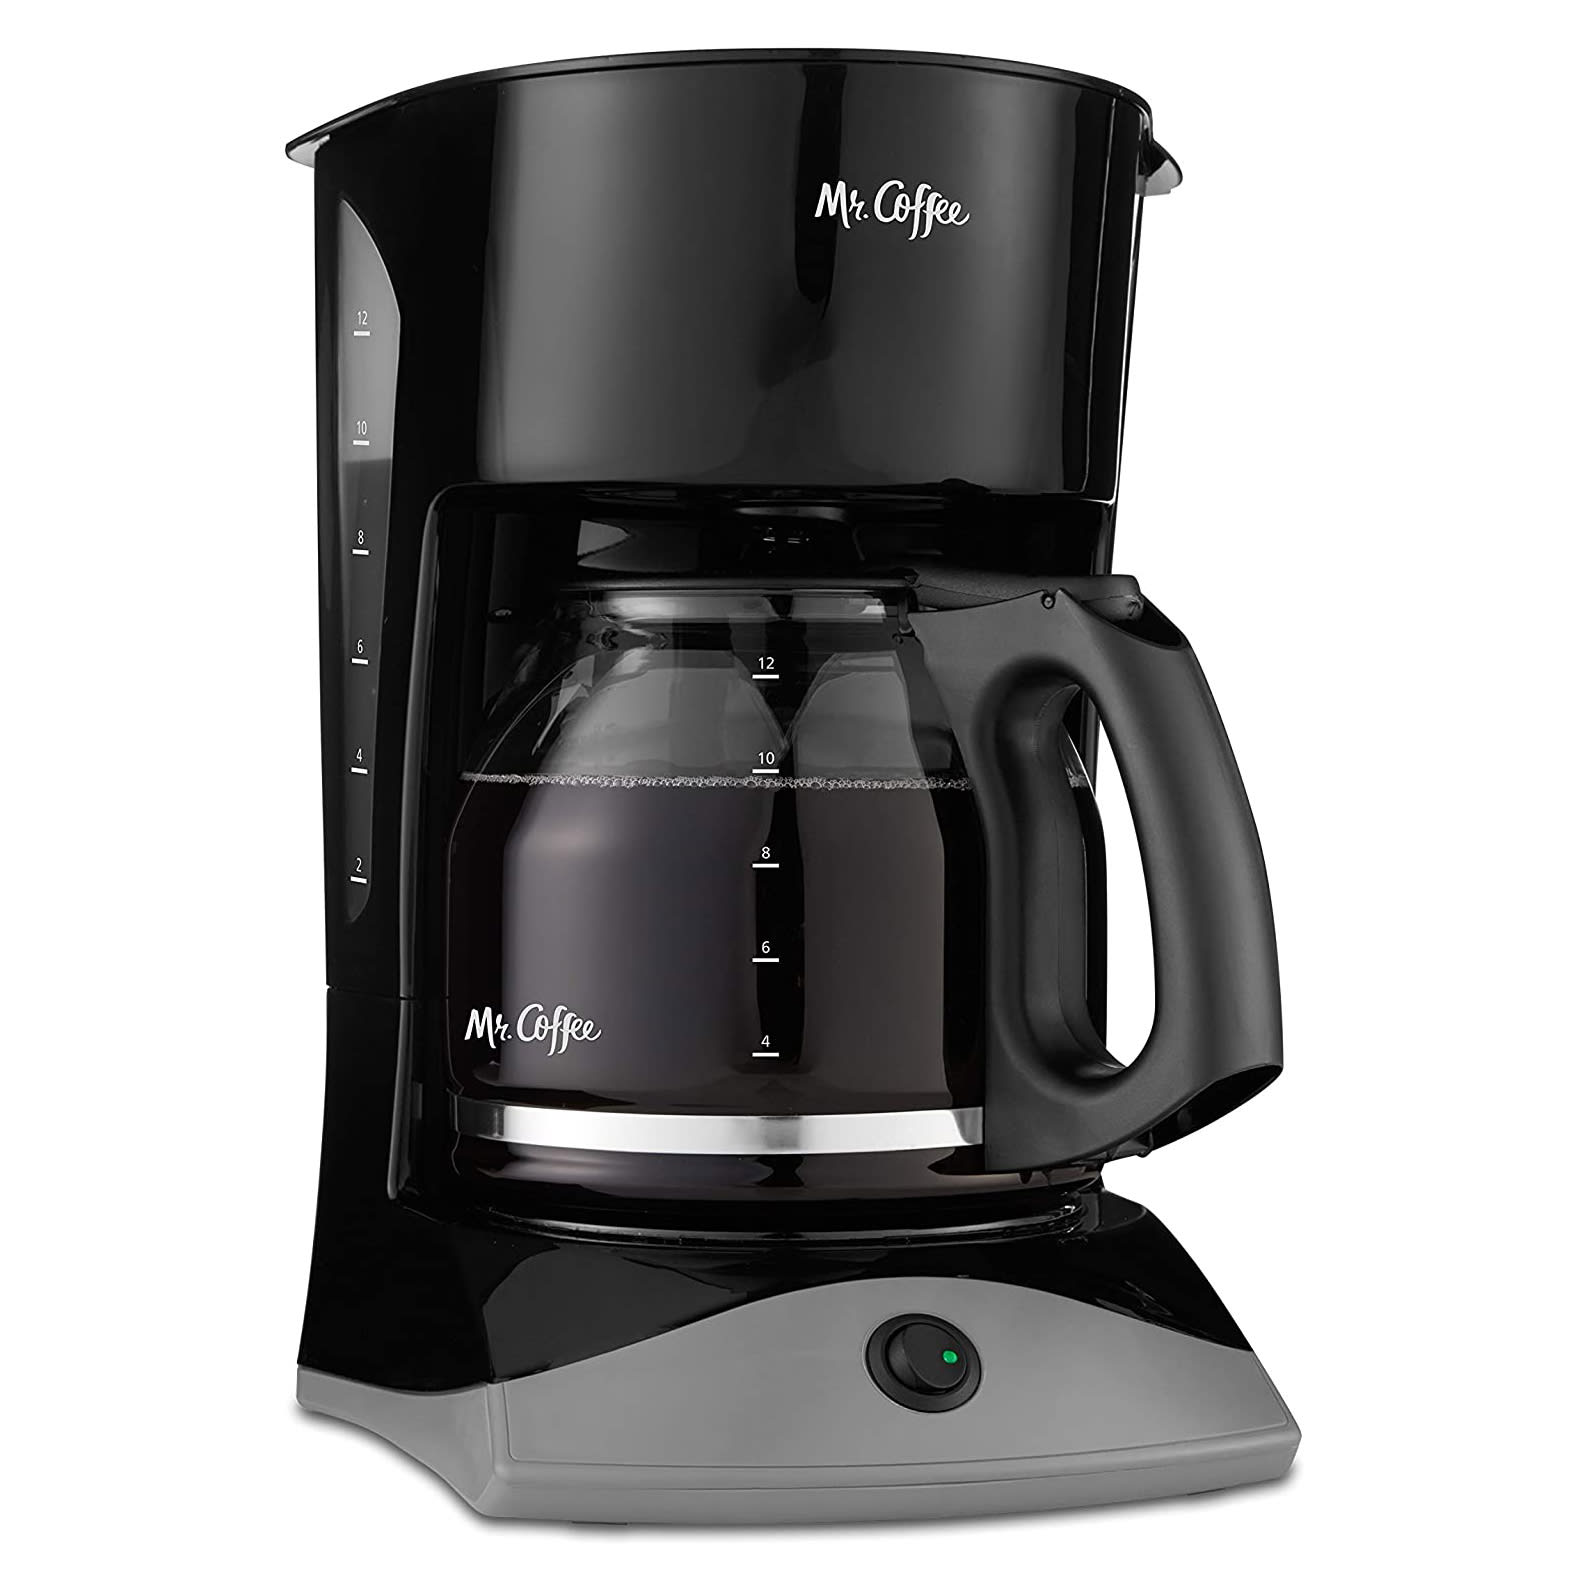 https://cdn.apartmenttherapy.info/image/upload/v1626816205/gen-workflow/product-database/mr-coffee-12-cup-coffe-maker-amazon.jpg